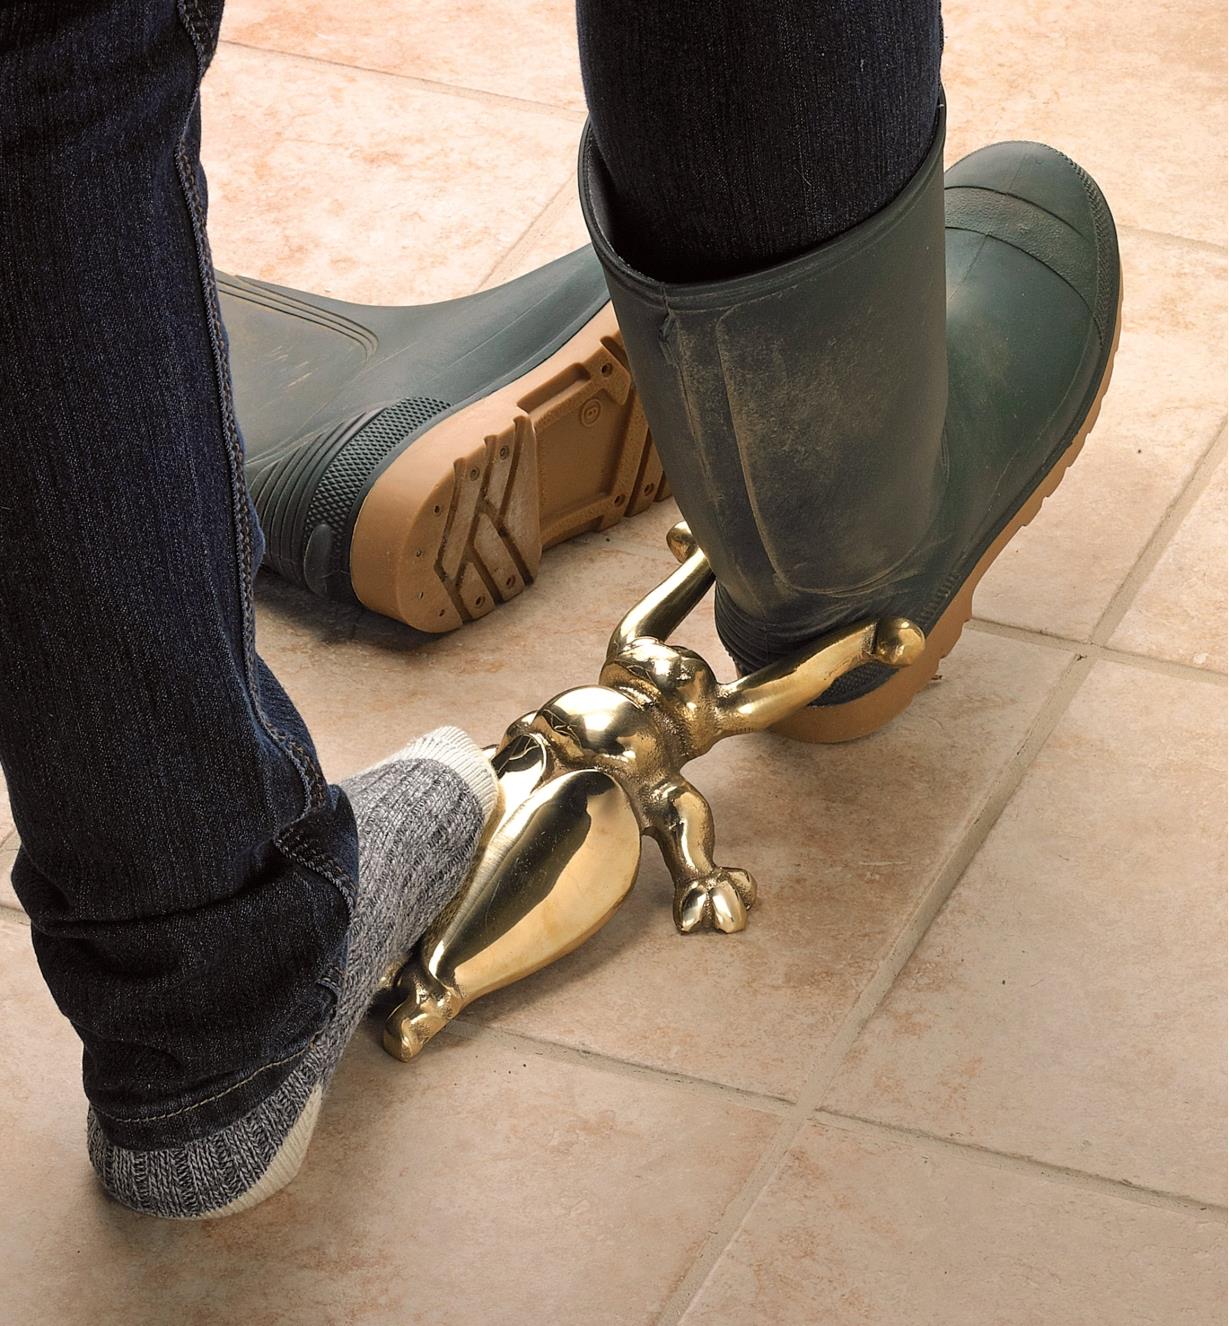 Using the Brass Beetle Bootjack to remove a boot